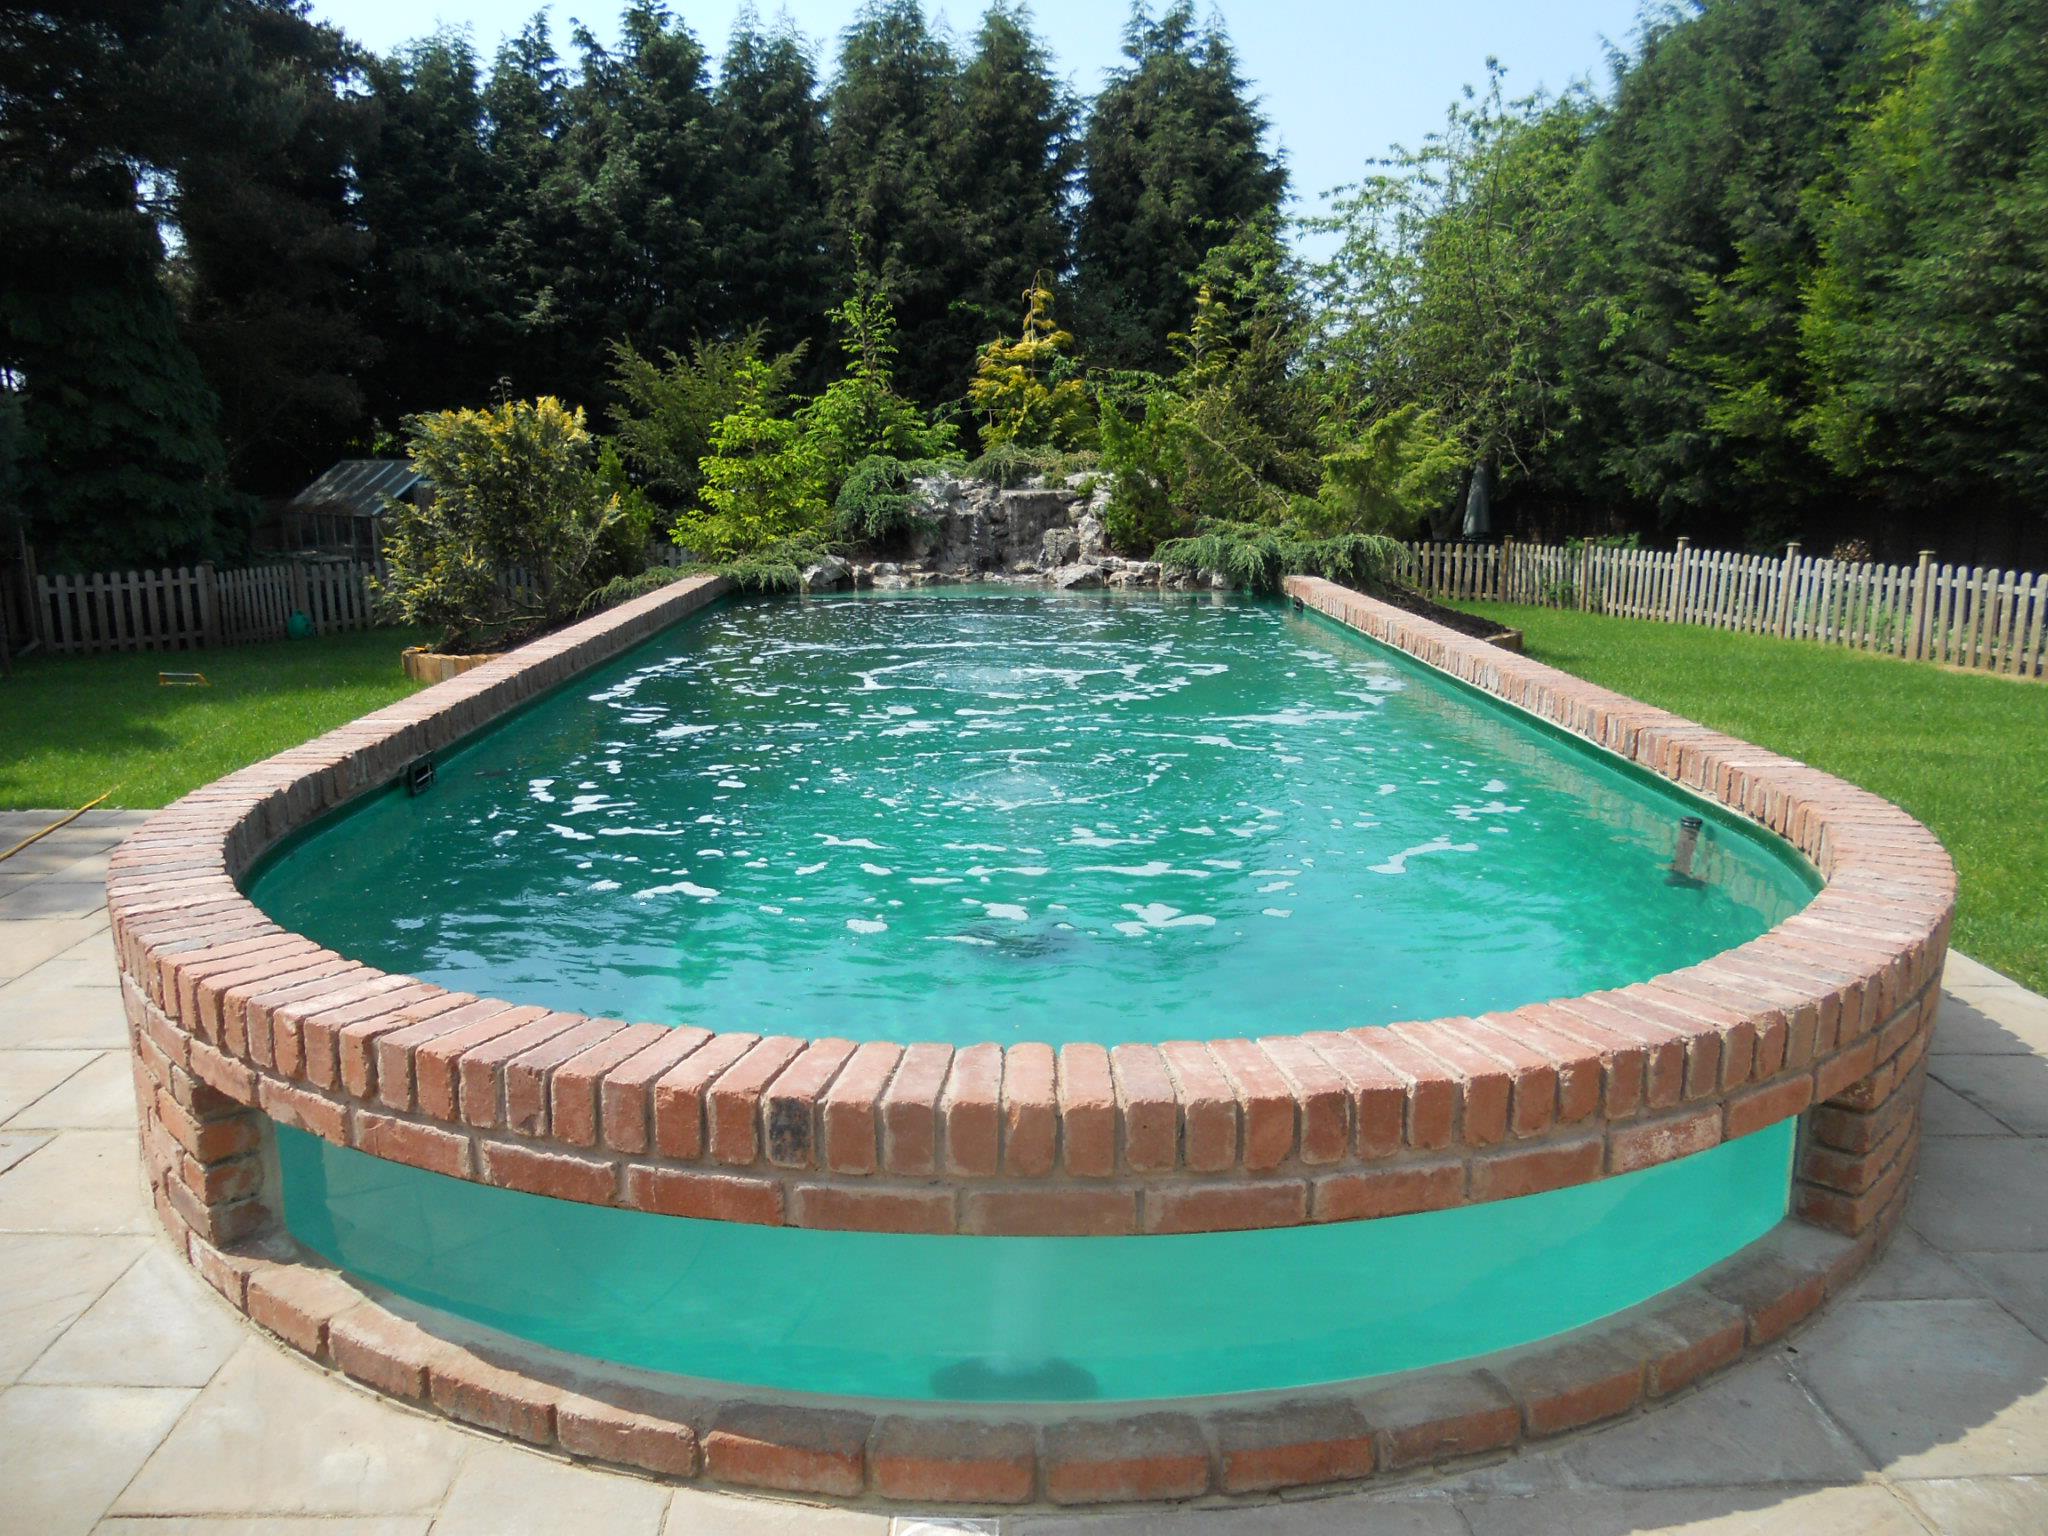 above ground pools that look like in ground above ground pools can come with waterfall features. image source ... RESQXWH